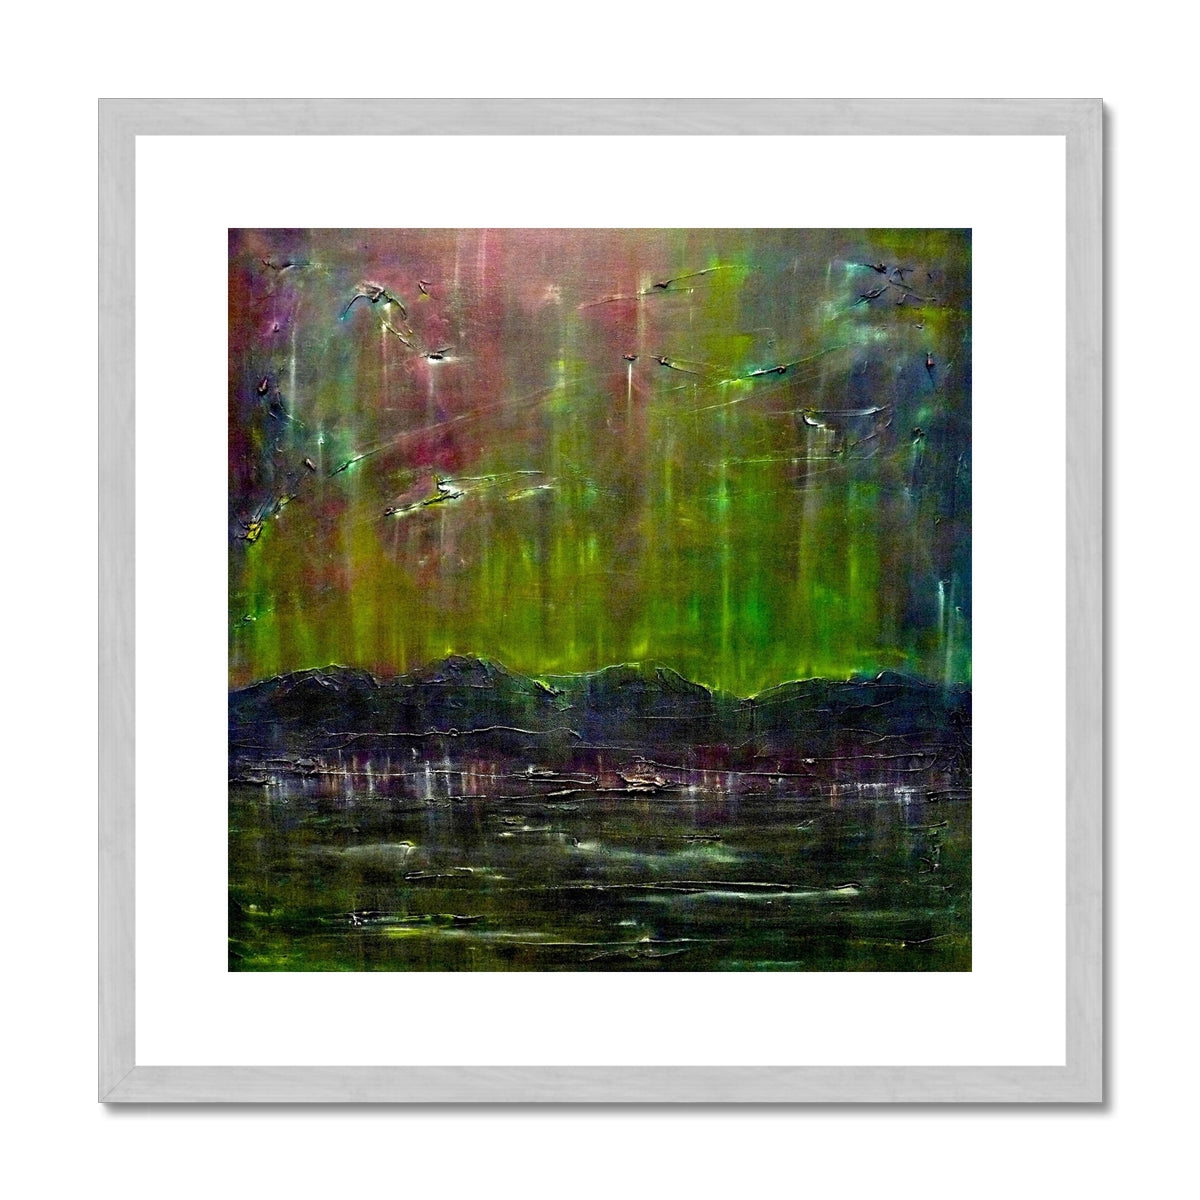 Cromarty Harbour Northern Lights Painting | Antique Framed & Mounted Prints From Scotland-Antique Framed & Mounted Prints-Scottish Highlands & Lowlands Art Gallery-20"x20"-Silver Frame-Paintings, Prints, Homeware, Art Gifts From Scotland By Scottish Artist Kevin Hunter